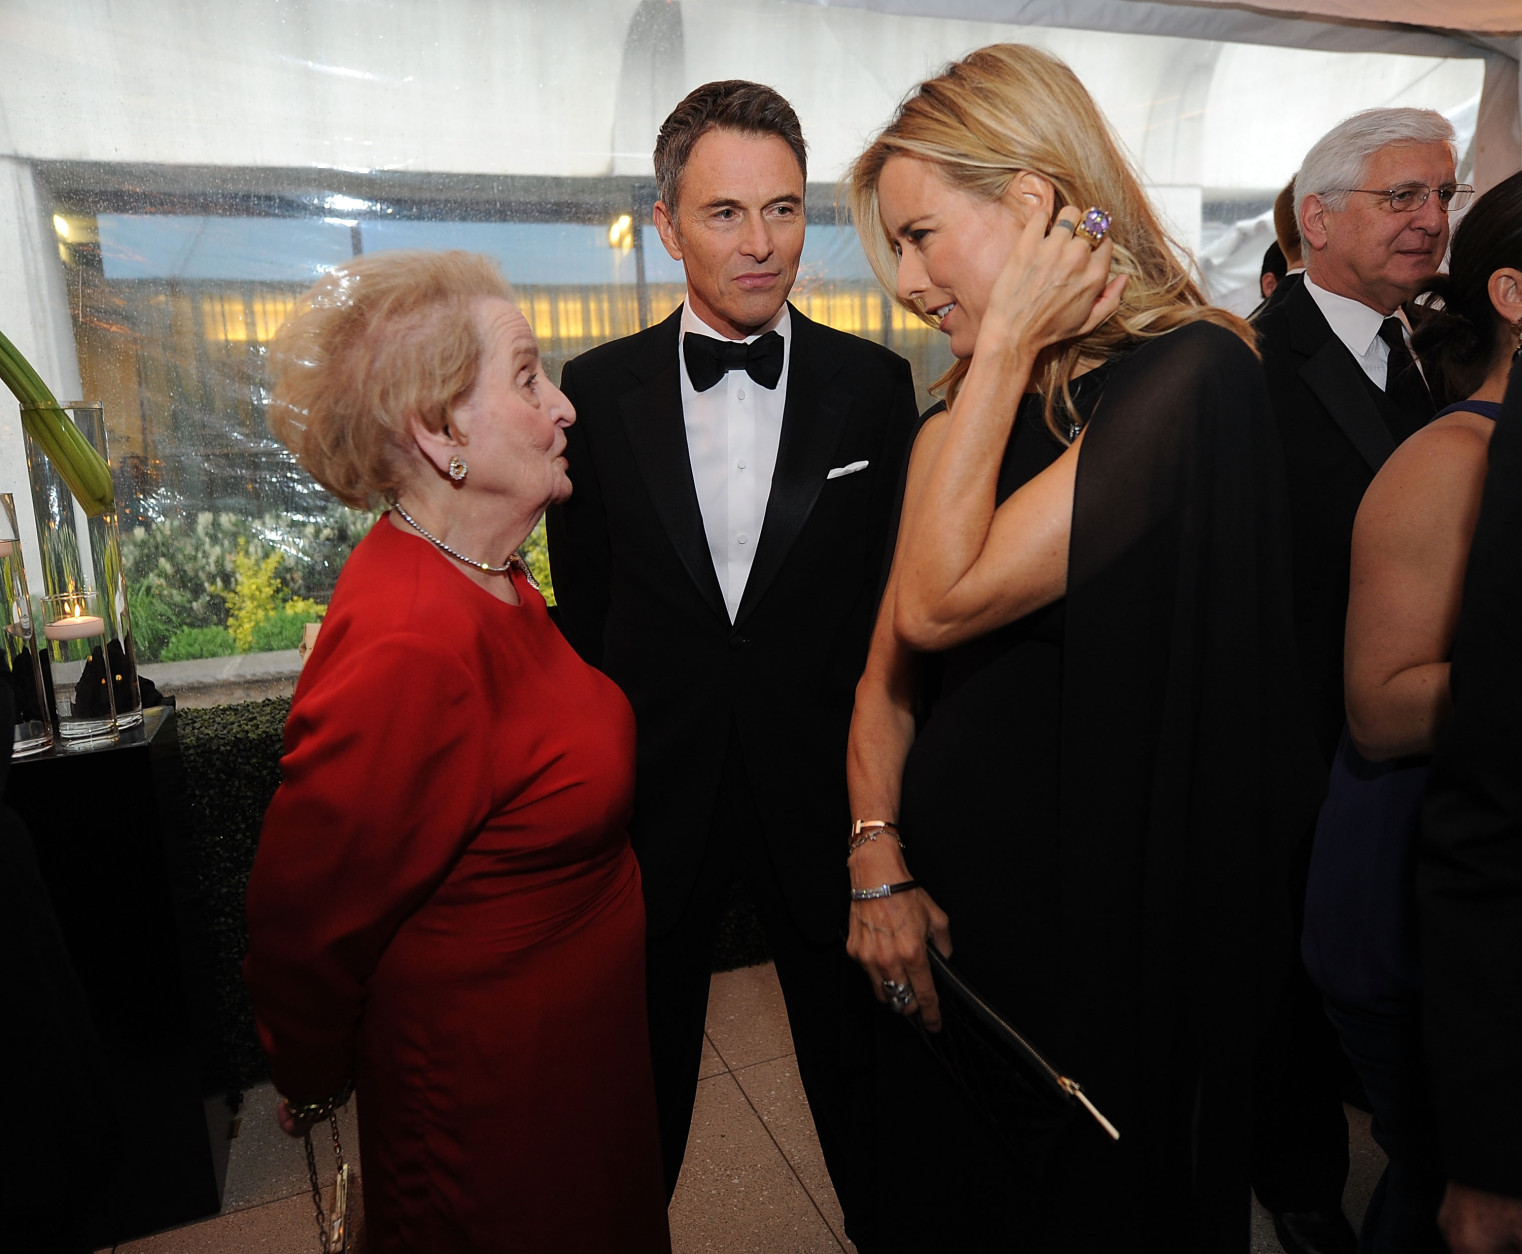 Madeleine Albright(L) and Tea Leoni attend the National Journal And The Atlantic White House Correspondents' Pre-Dinner Reception at The Washington Hilton on April 25, 2015 in Washington, DC. (Photo by Brad Barket/Getty Images)